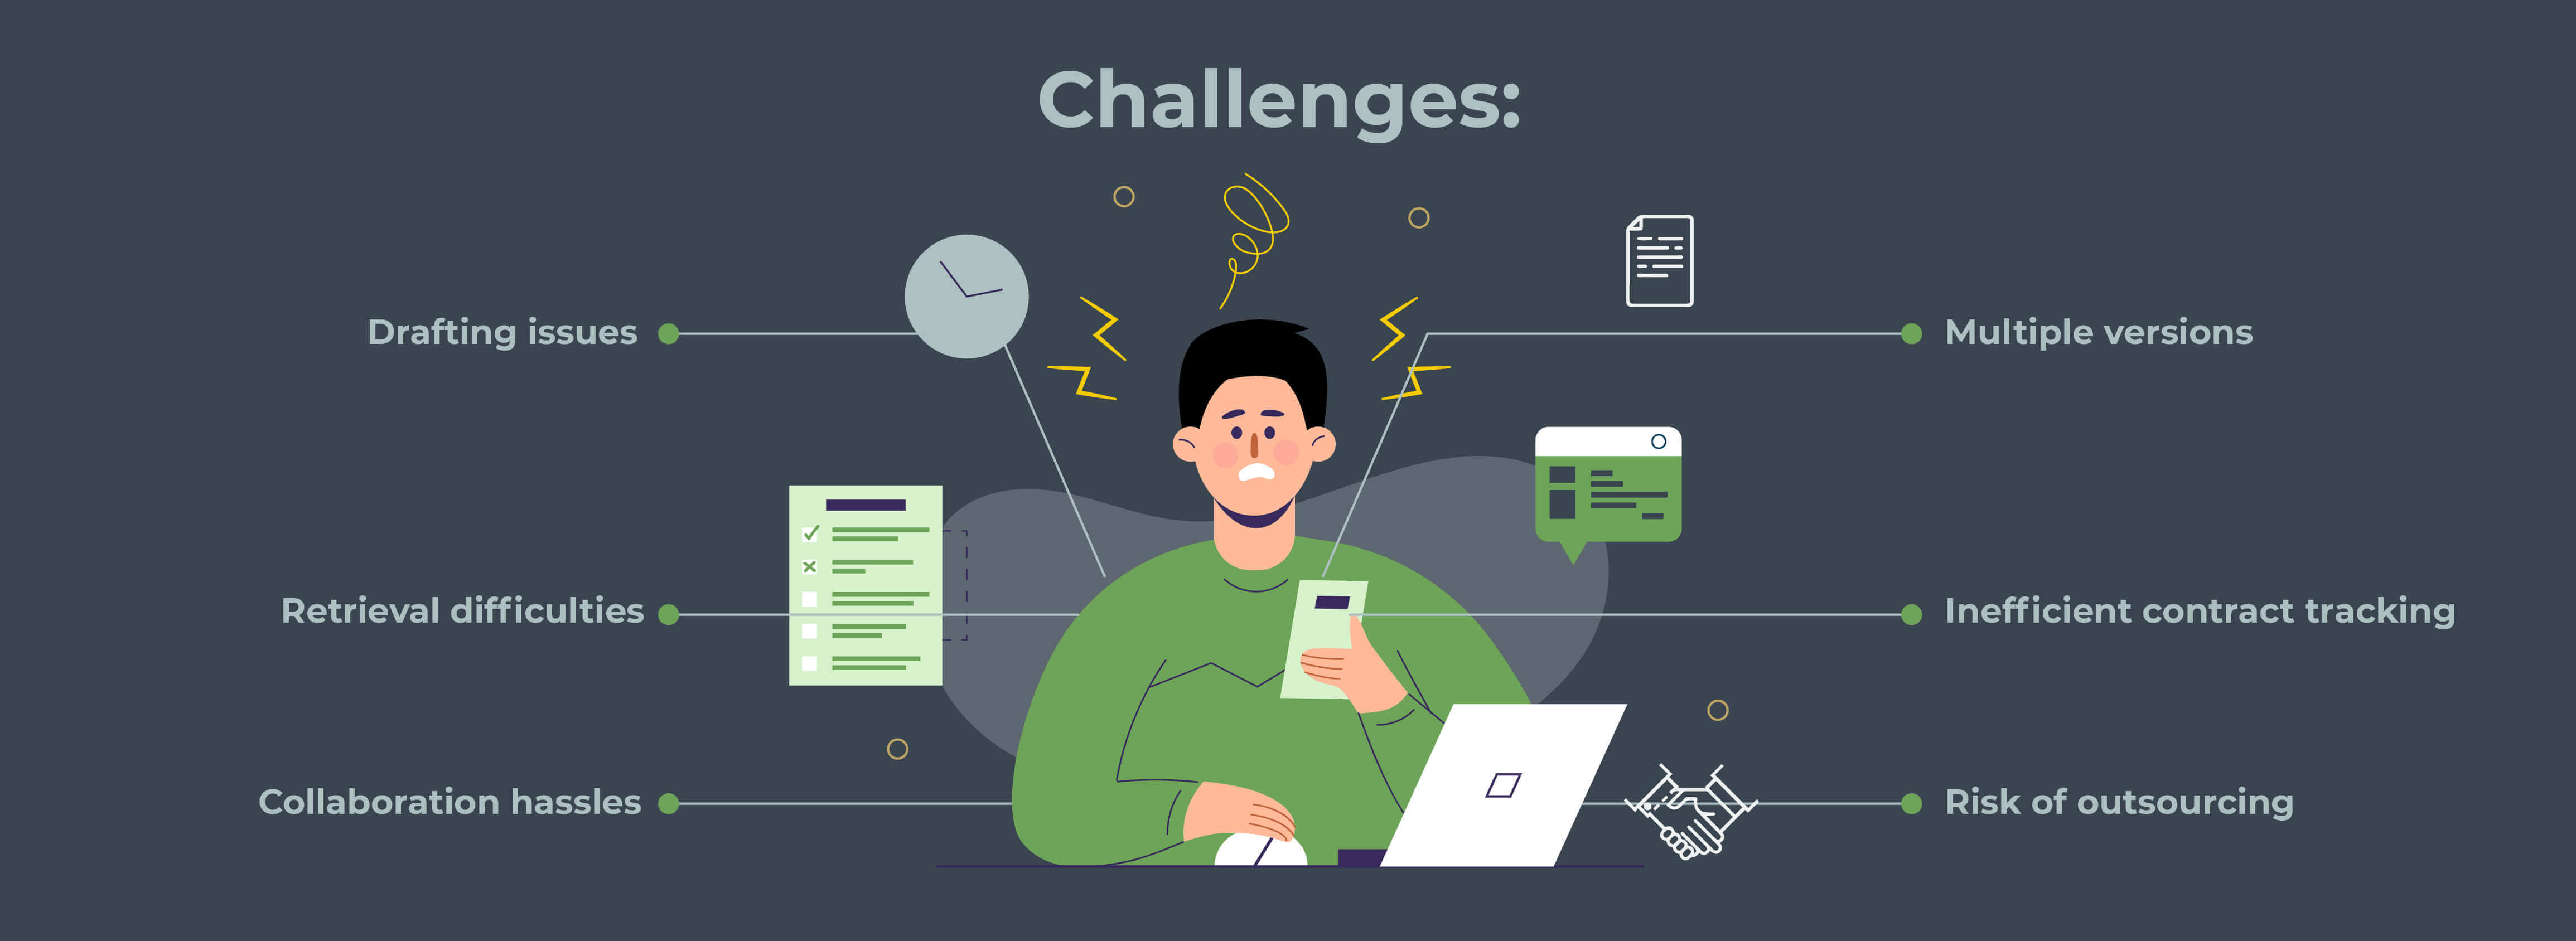 Managing-contracts-challenges